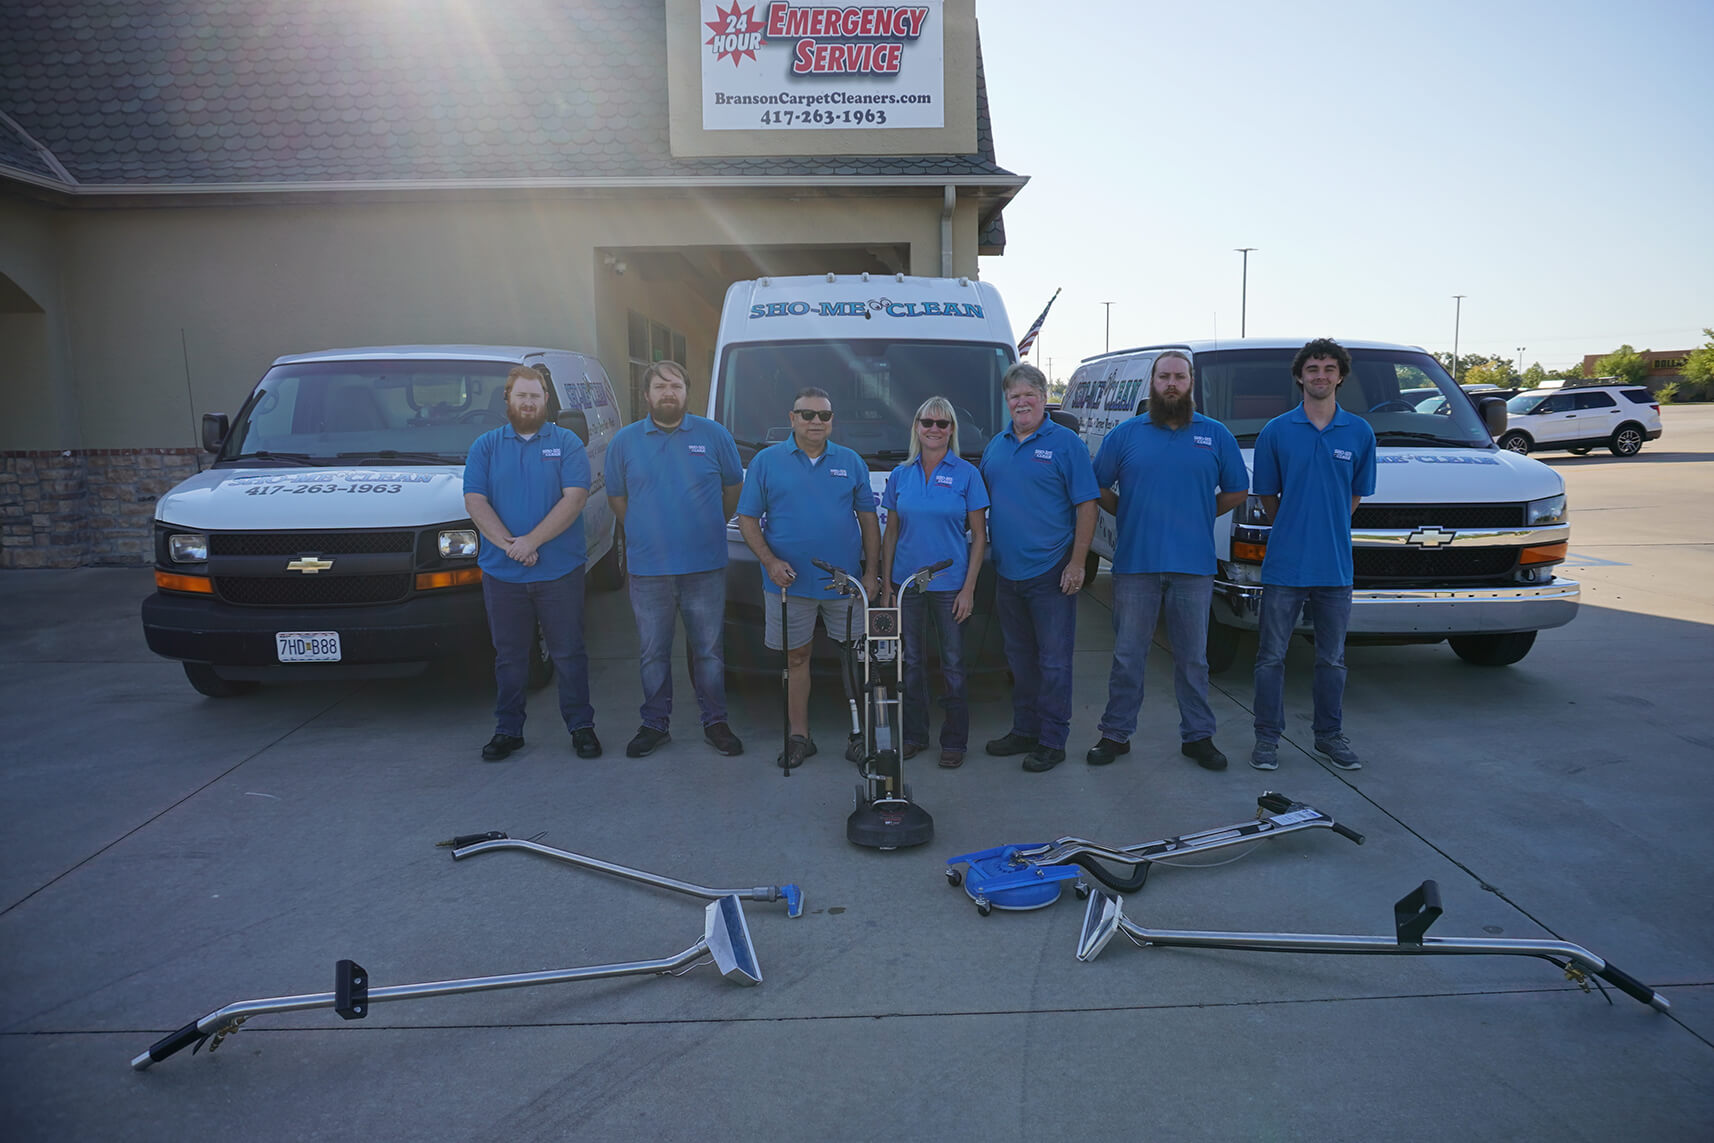 Sho-Me Clean Carpet Cleaning, team lined up with equipment in front of company vans - Branson, MO